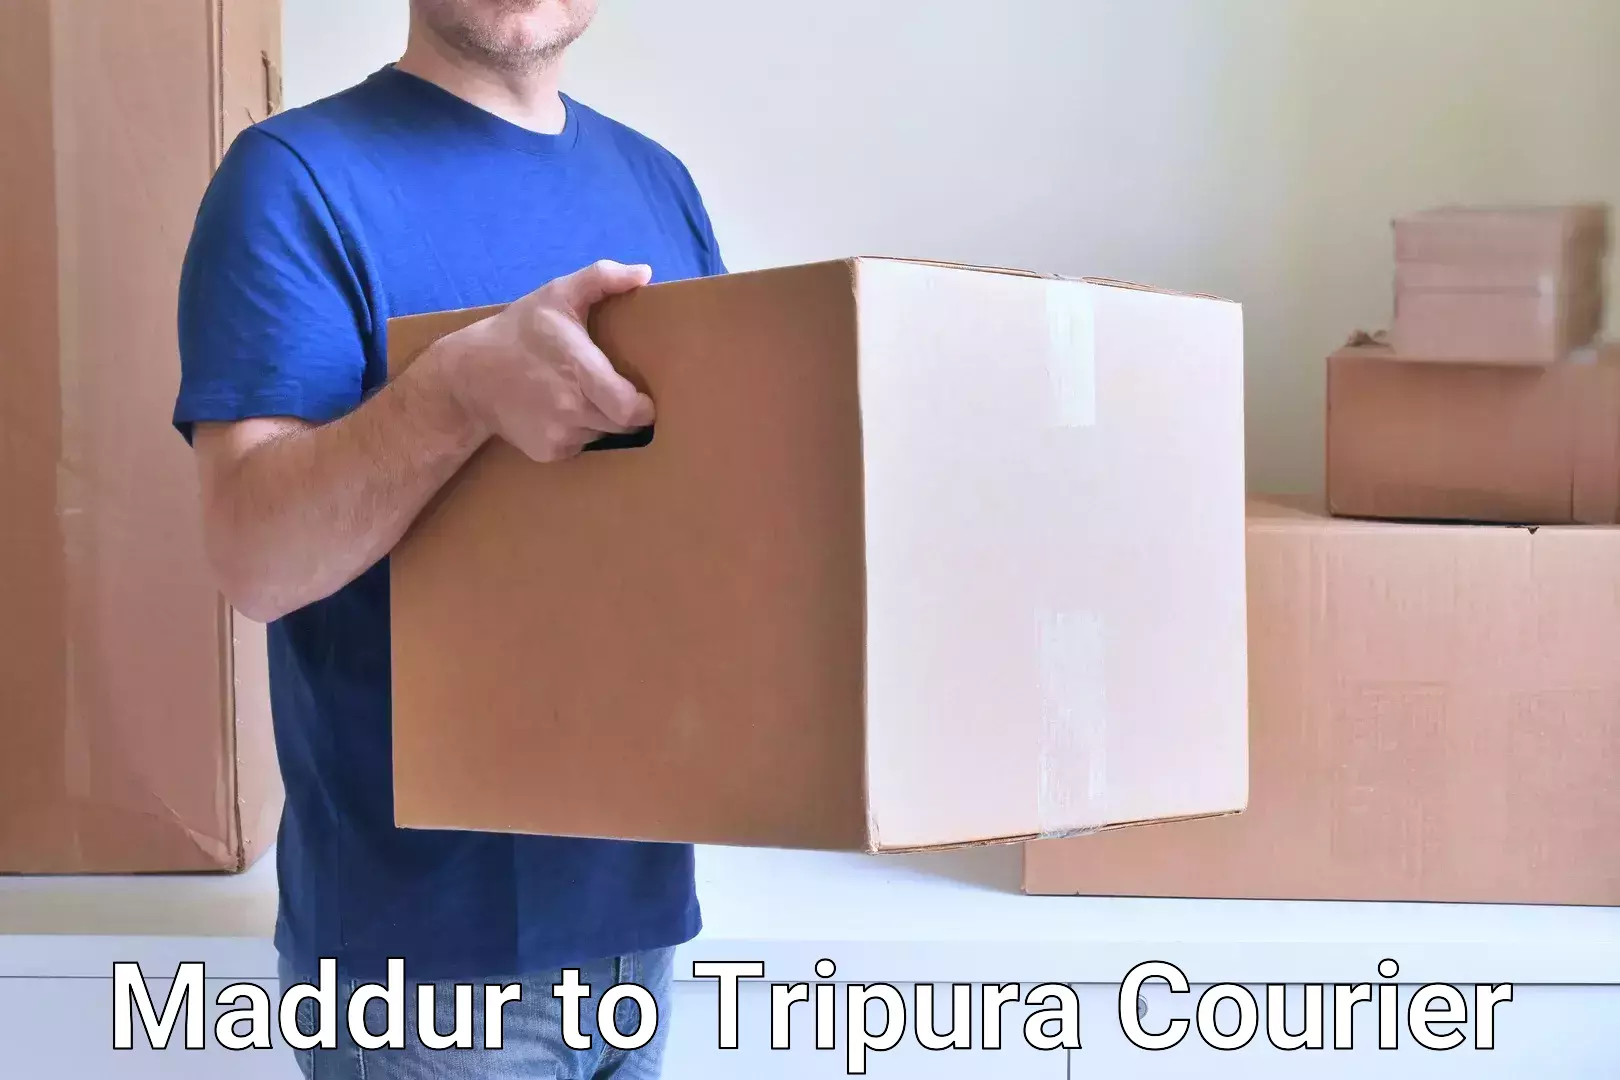 Nationwide delivery network Maddur to Udaipur Tripura